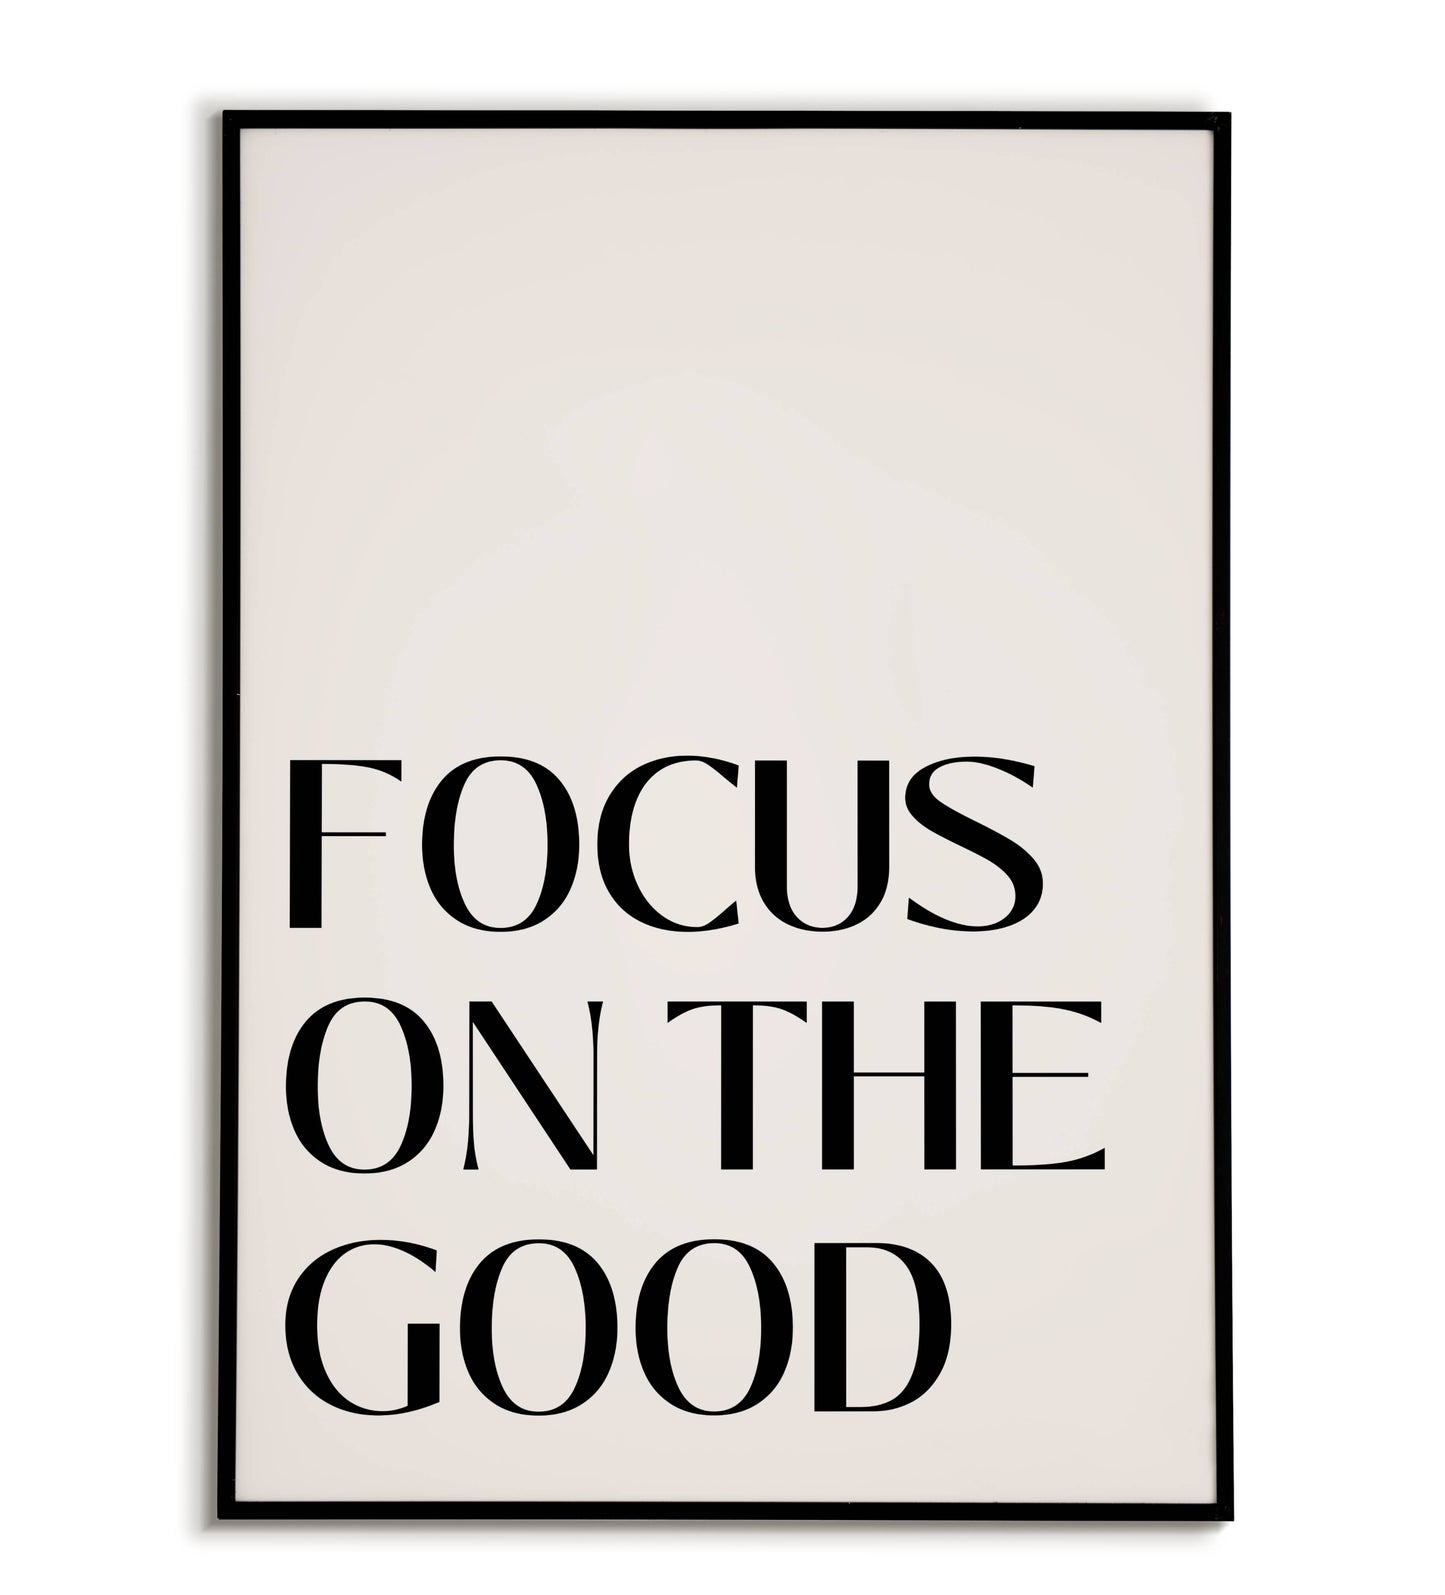 Focus on the Good - Printable Wall Art / Poster. A reminder to cultivate positivity.